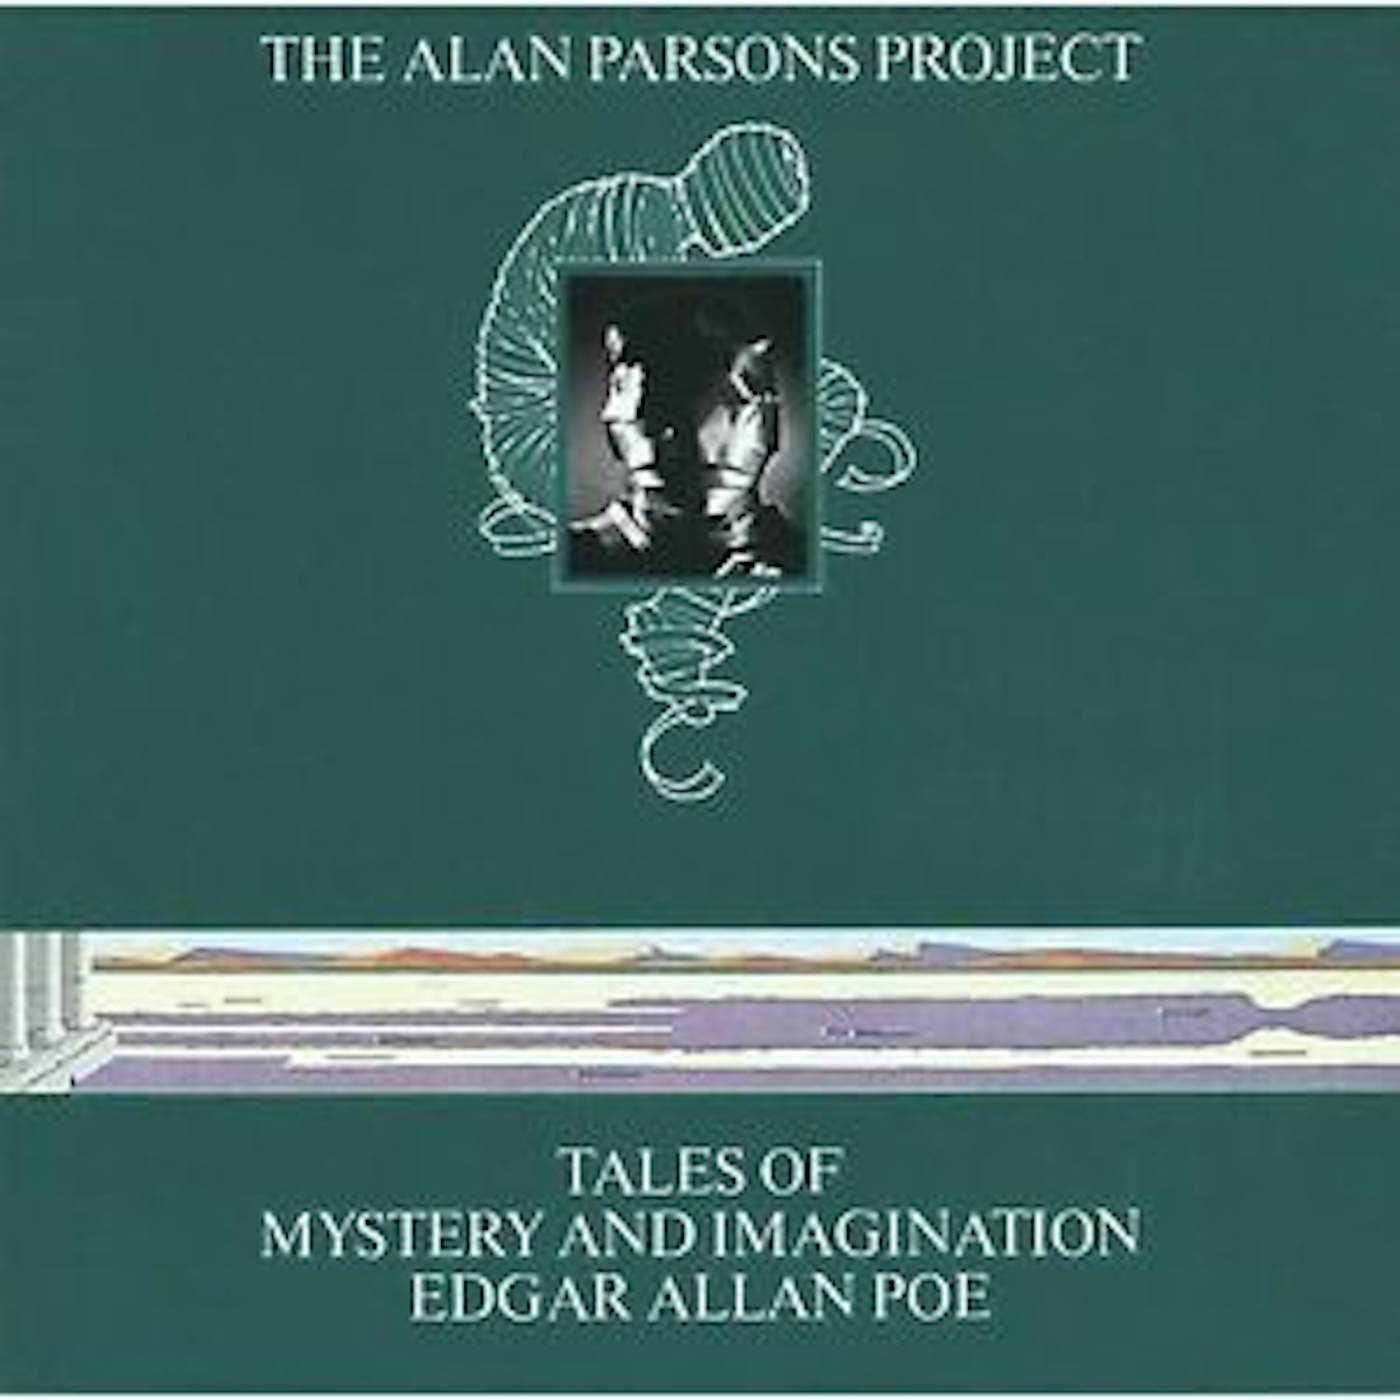 The Alan Parsons Project TALES OF MYSTERY & IMAGINATION EDGAR ALLAN POE CD